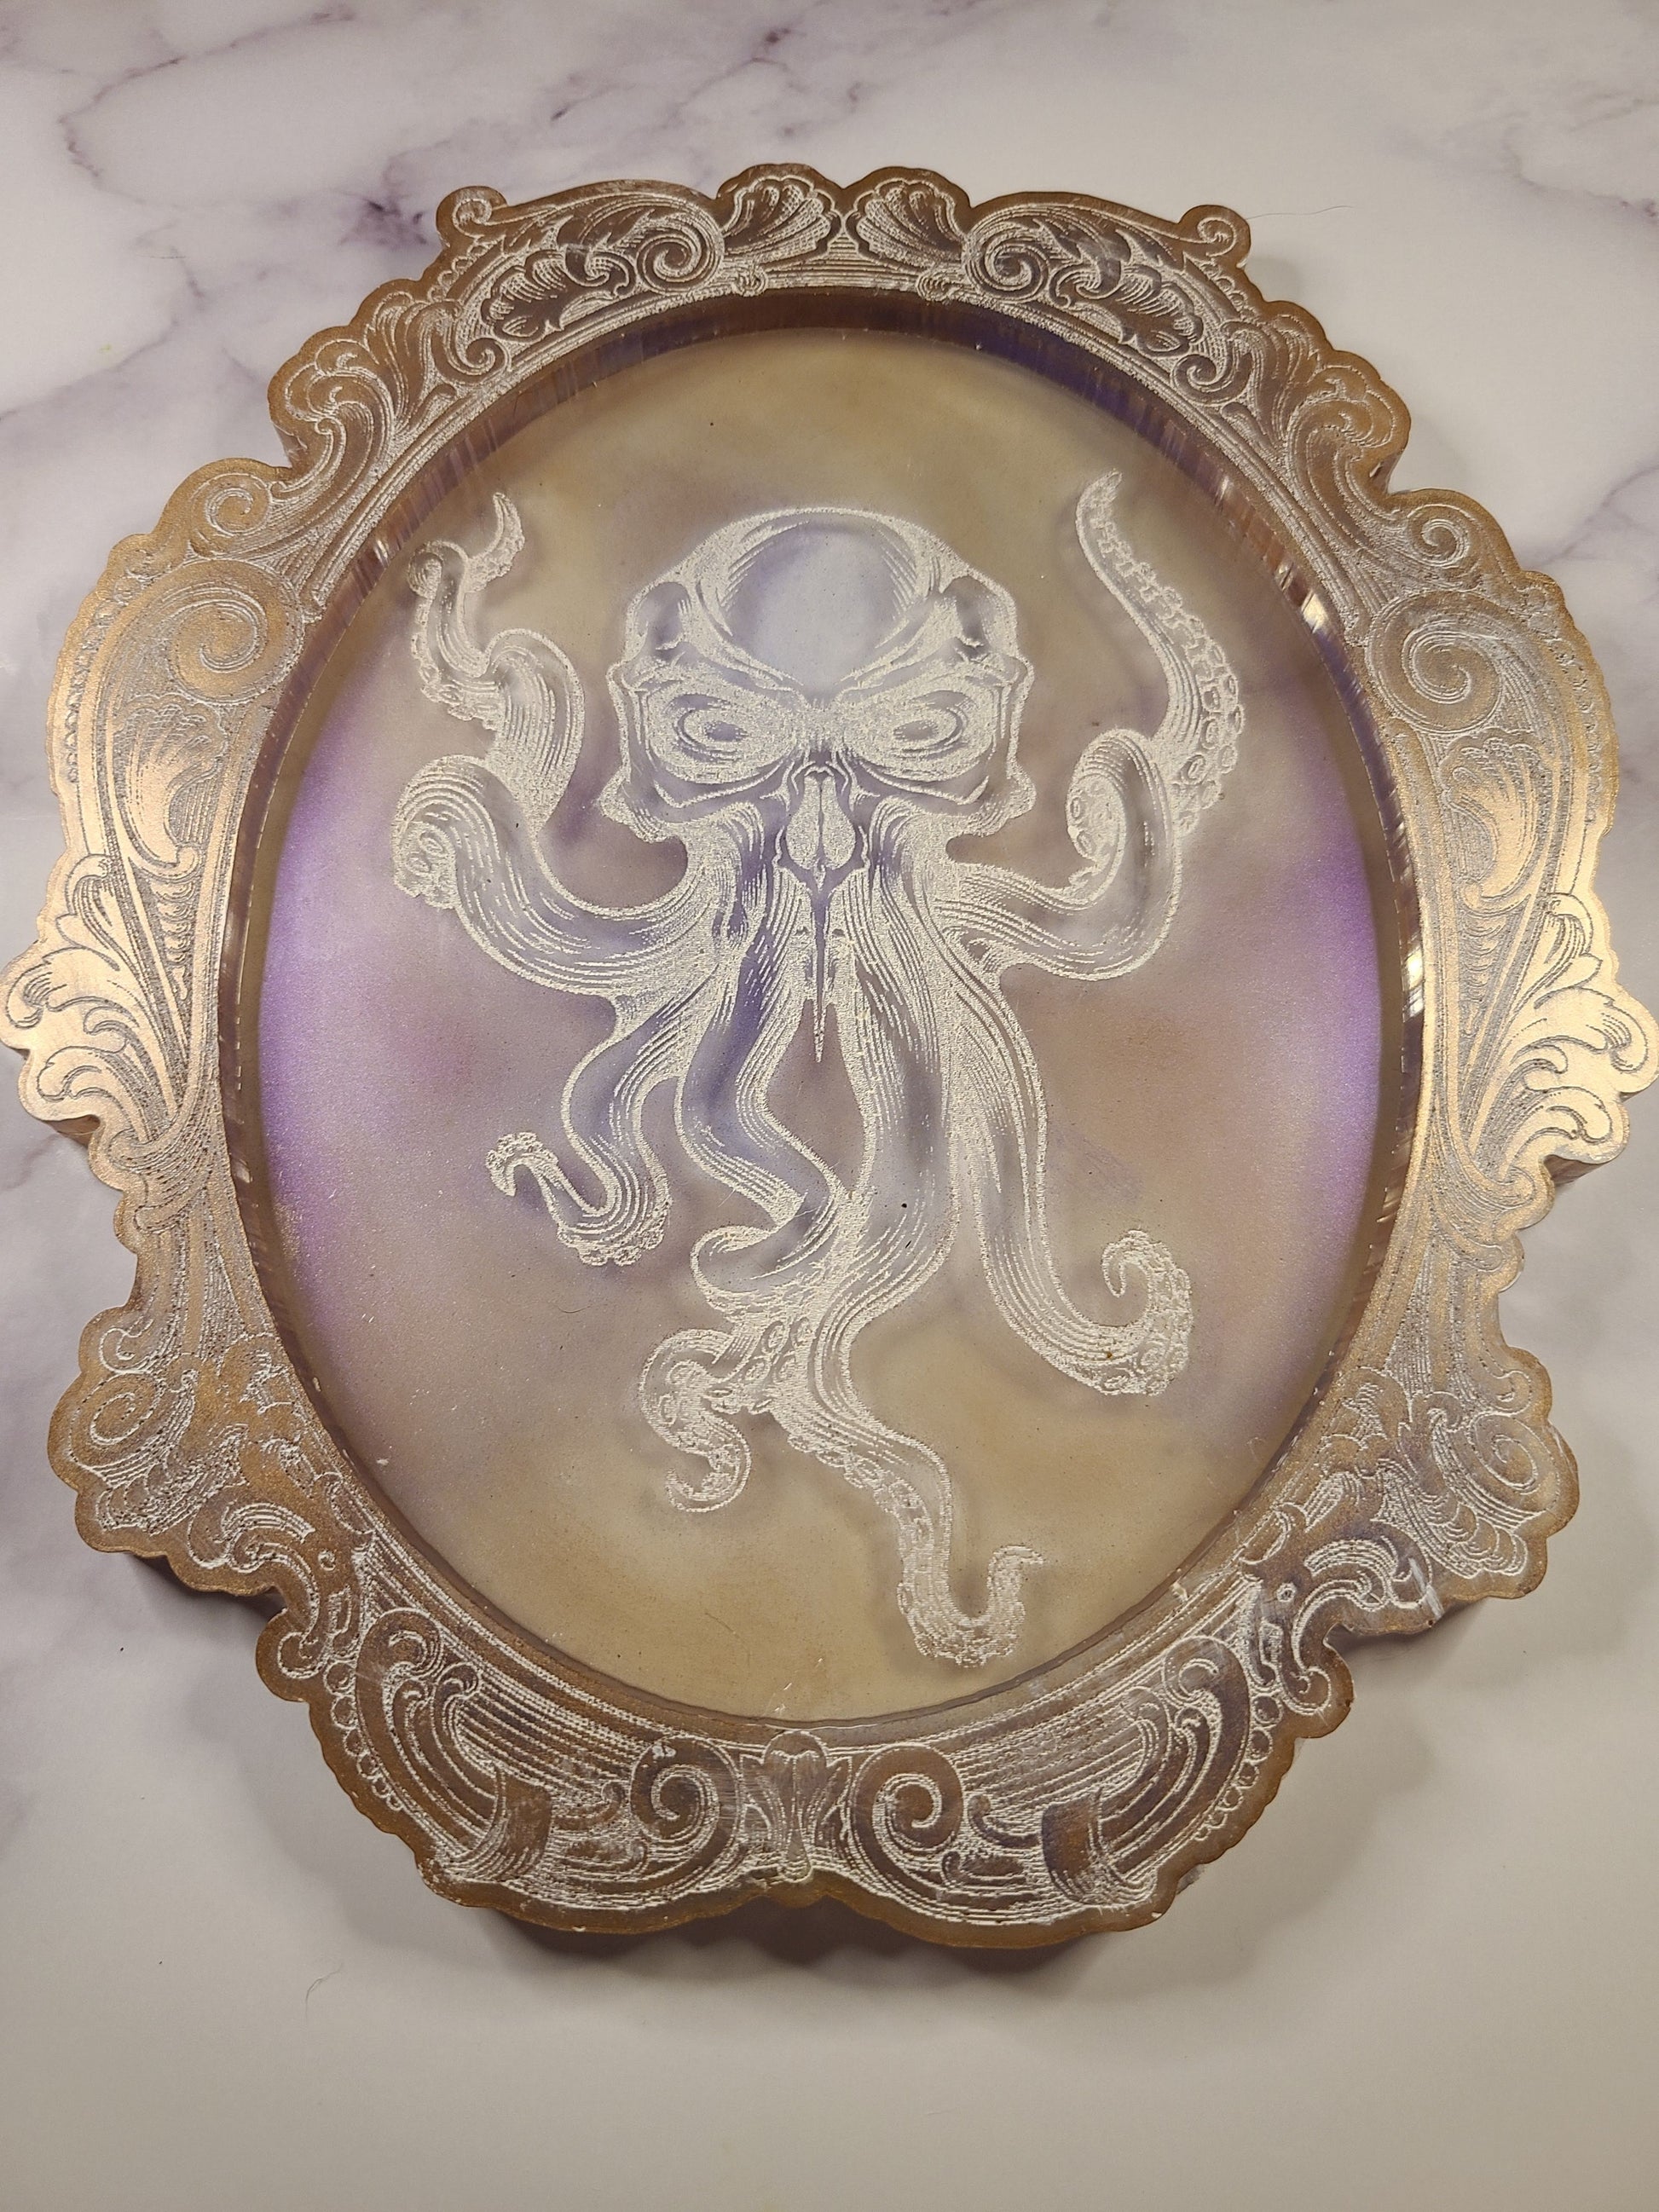 Victorian Gothic Cthulhu Resin Portrait Wall Art TrayWhen the old gods come back, why not impress our massive tentacles overlord with a one of a kind decorative tray.This handmade resin tray measures 8×6.5 in and is maWitchin Waifu